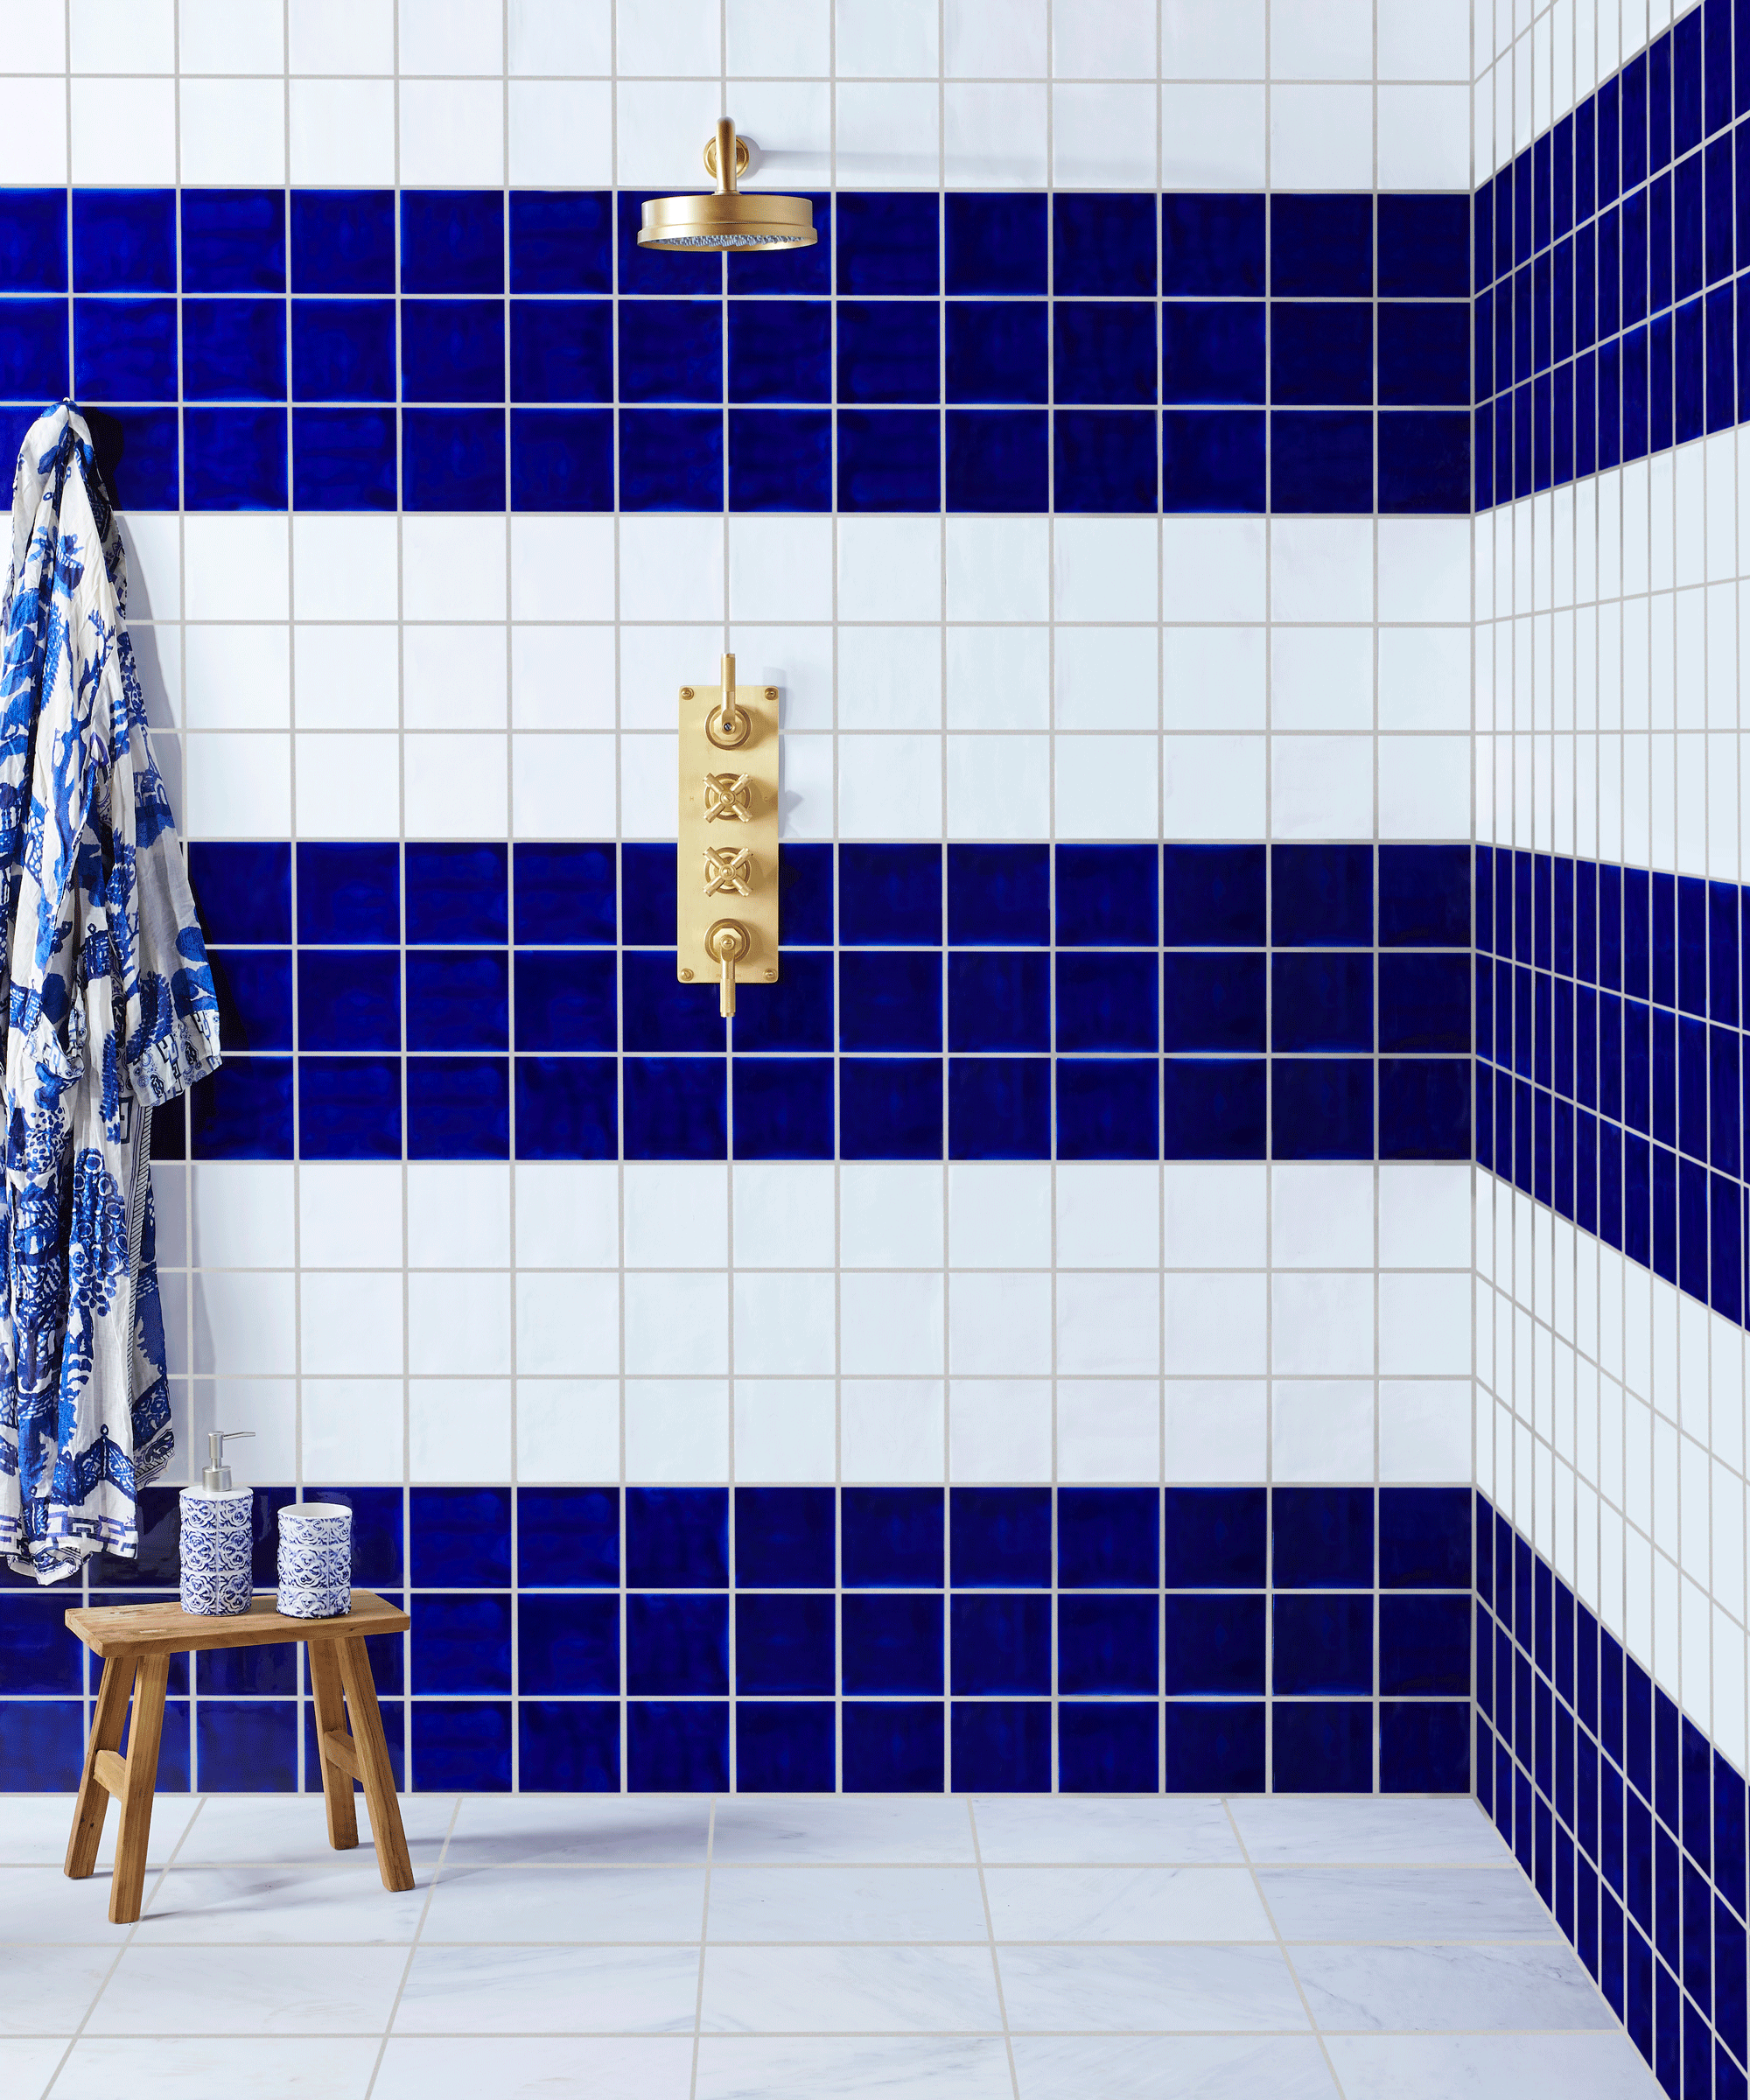 Bathroom shower tiled in blue and white squared tiles